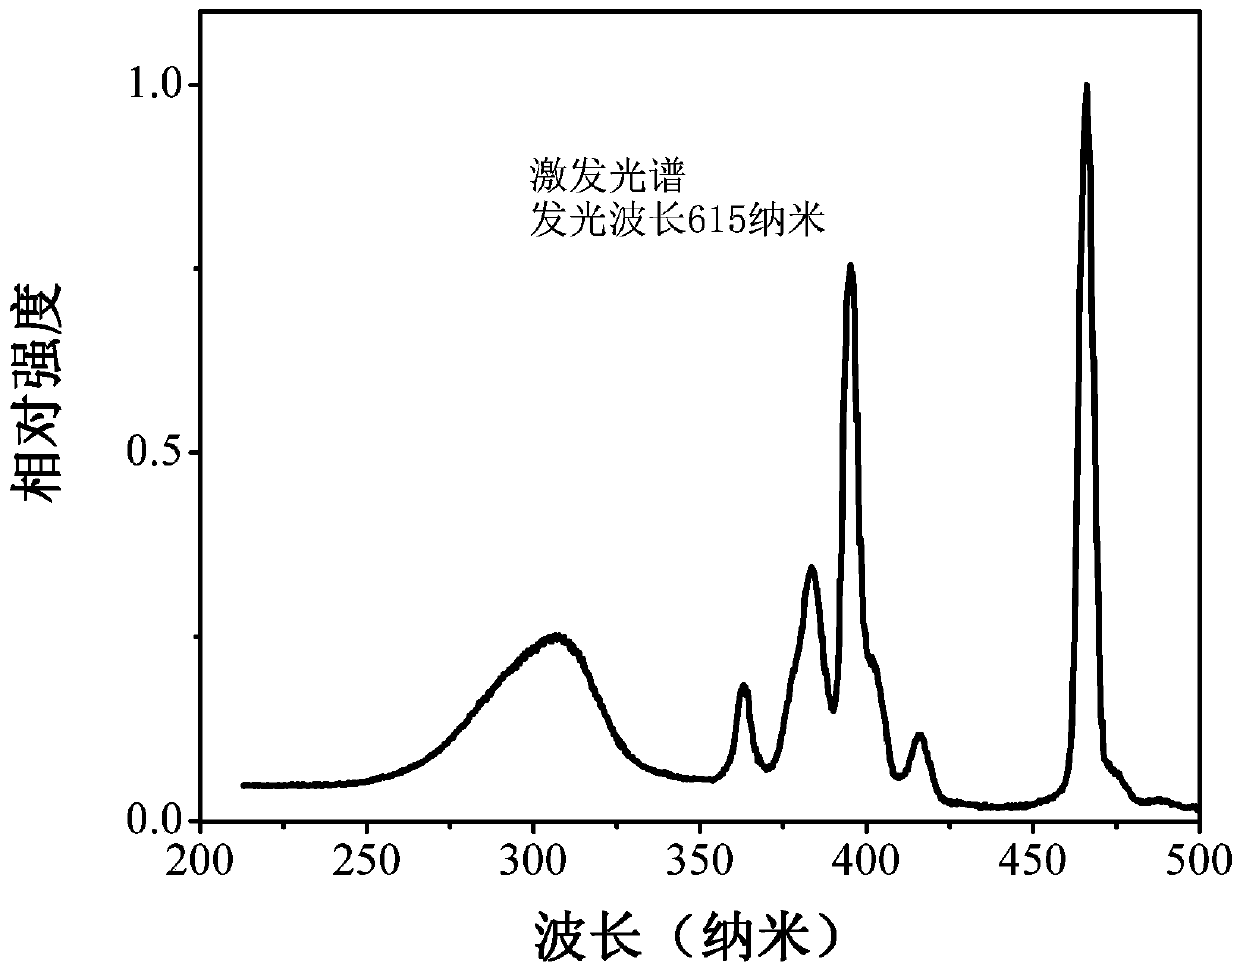 Aluminate red phosphor activated by europium ions Eu3+ and preparation method of aluminate red phosphor